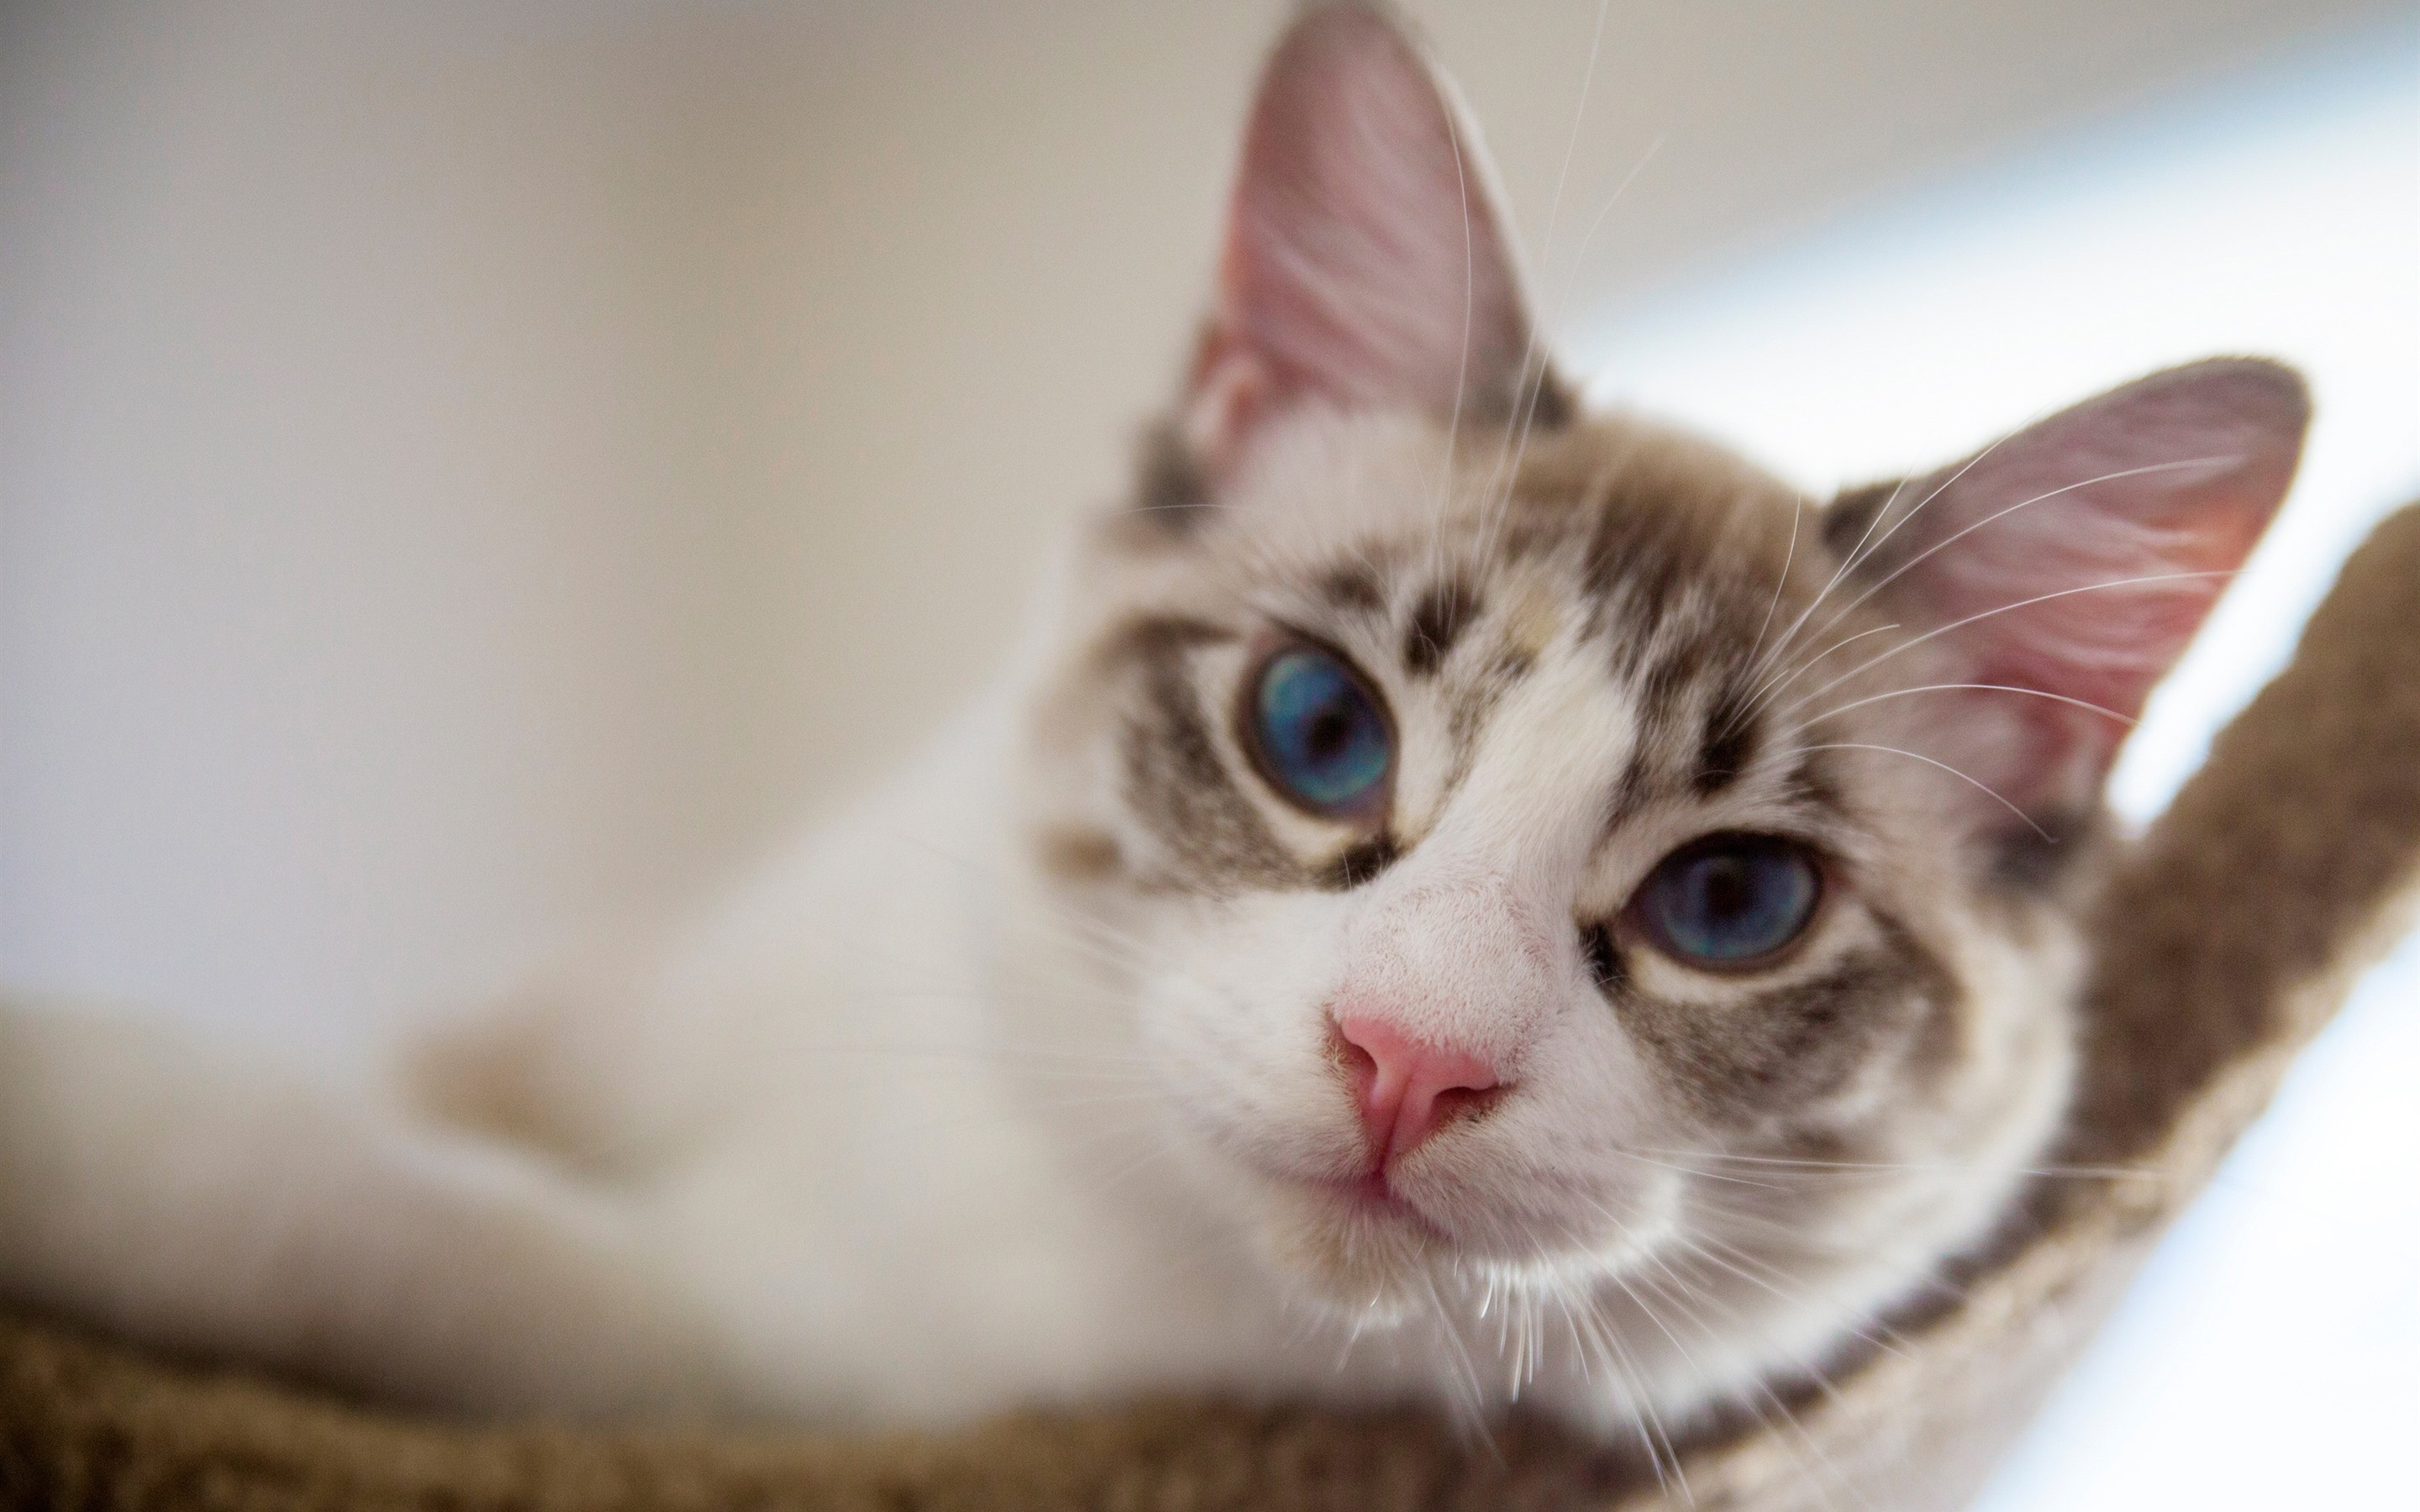 A domestic blue-eyed cat looks intently at the viewer